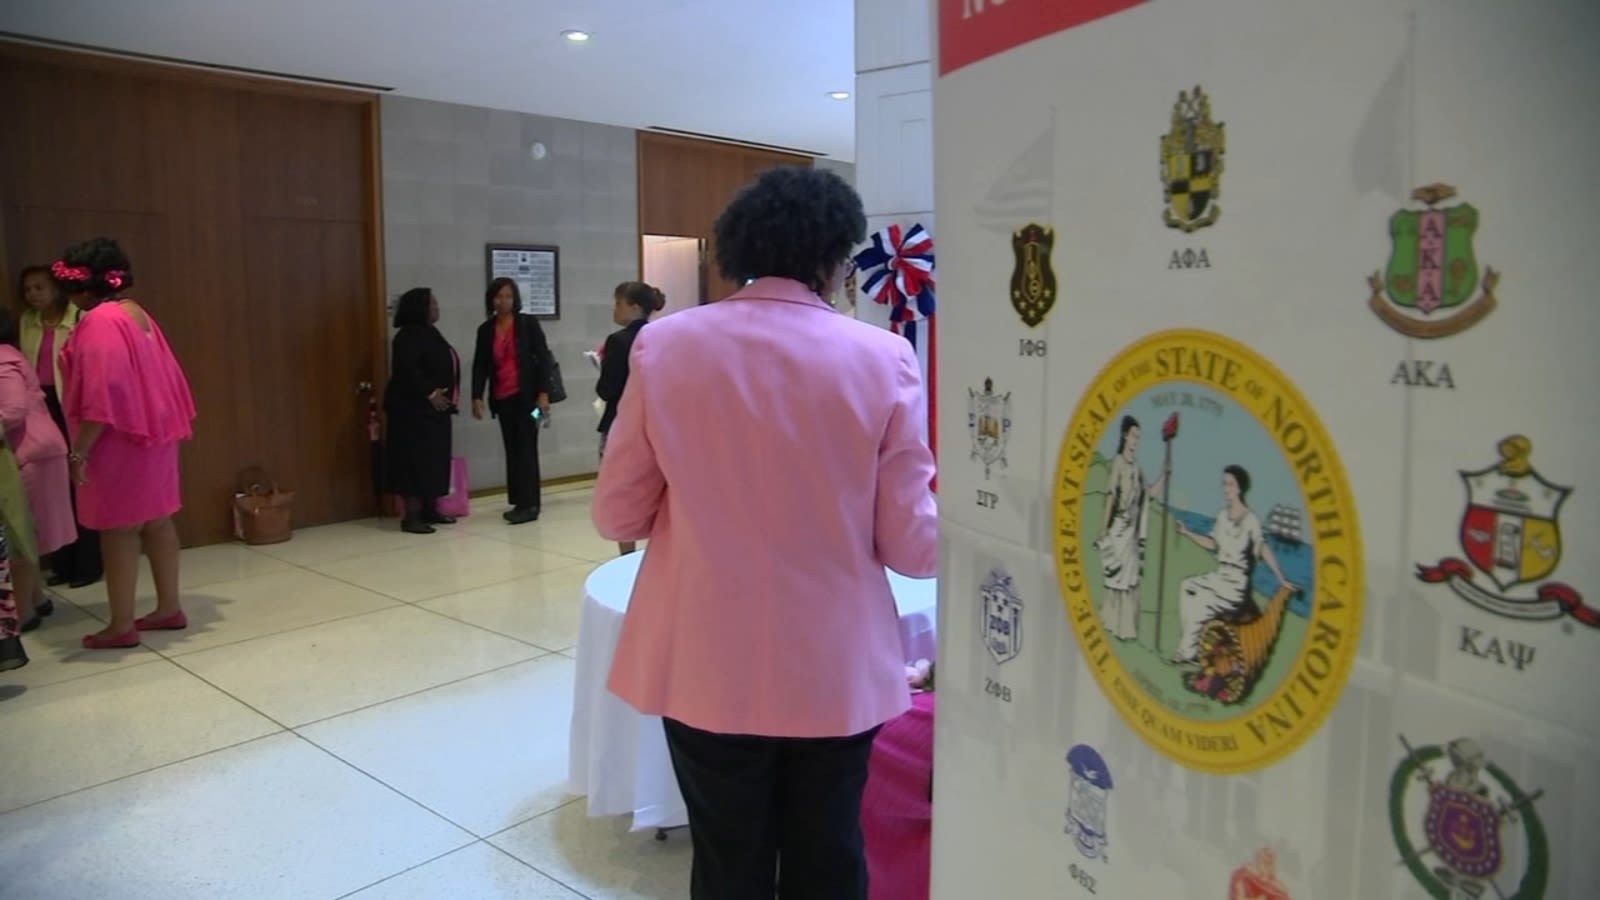 NC's Black Greek letter sororities and fraternities participate in annual Legislative Day